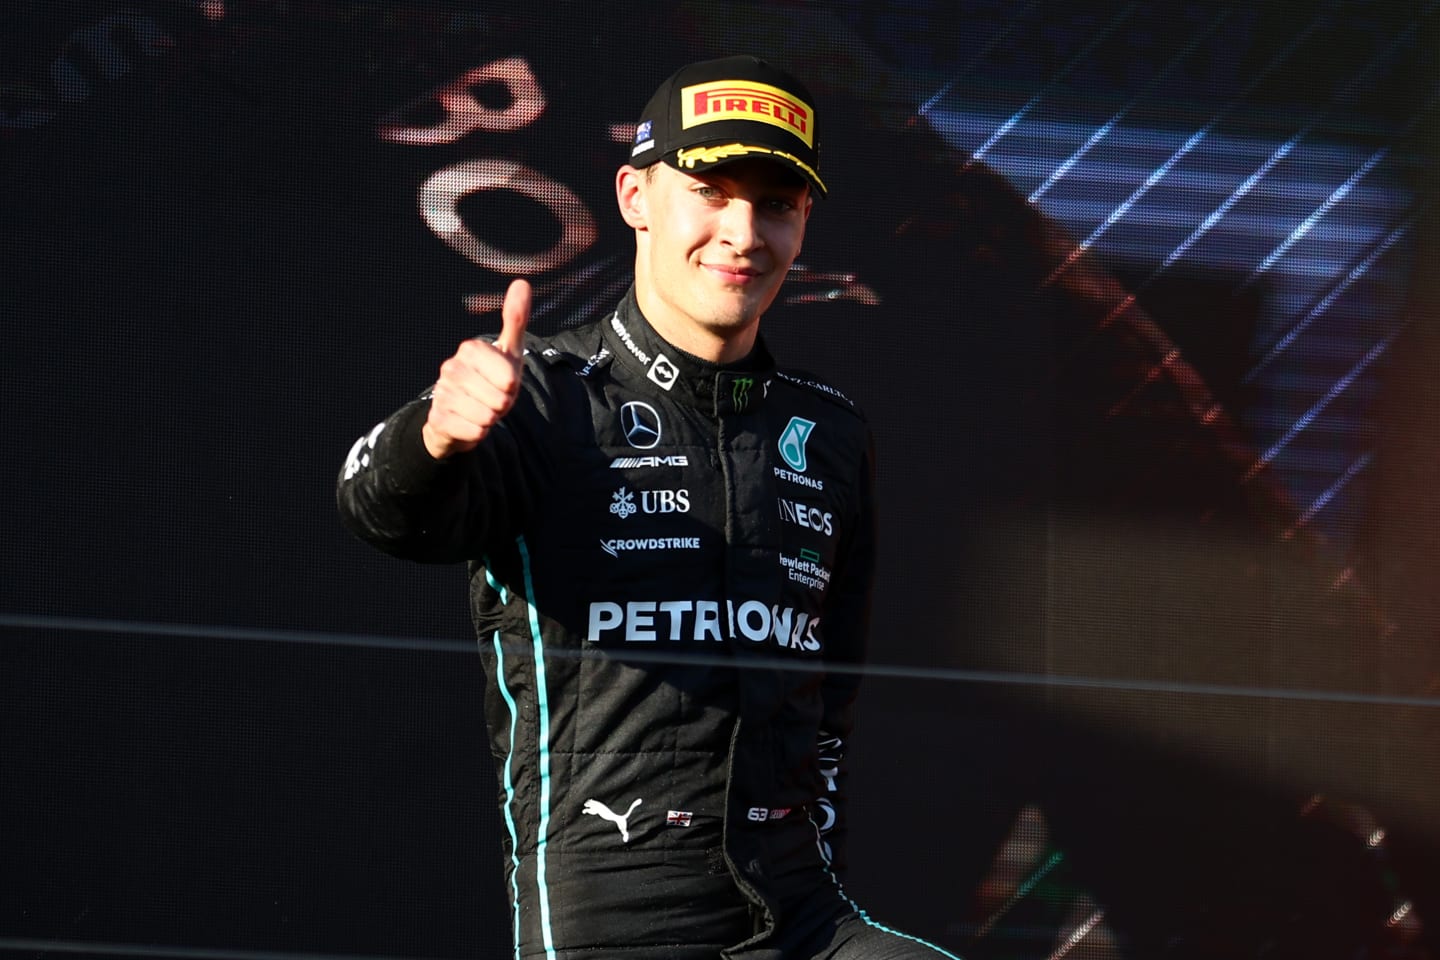 MELBOURNE, AUSTRALIA - APRIL 10: Third placed George Russell of Great Britain and Mercedes celebrates on the podium during the F1 Grand Prix of Australia at Melbourne Grand Prix Circuit on April 10, 2022 in Melbourne, Australia. (Photo by Bryn Lennon - Formula 1/Formula 1 via Getty Images)